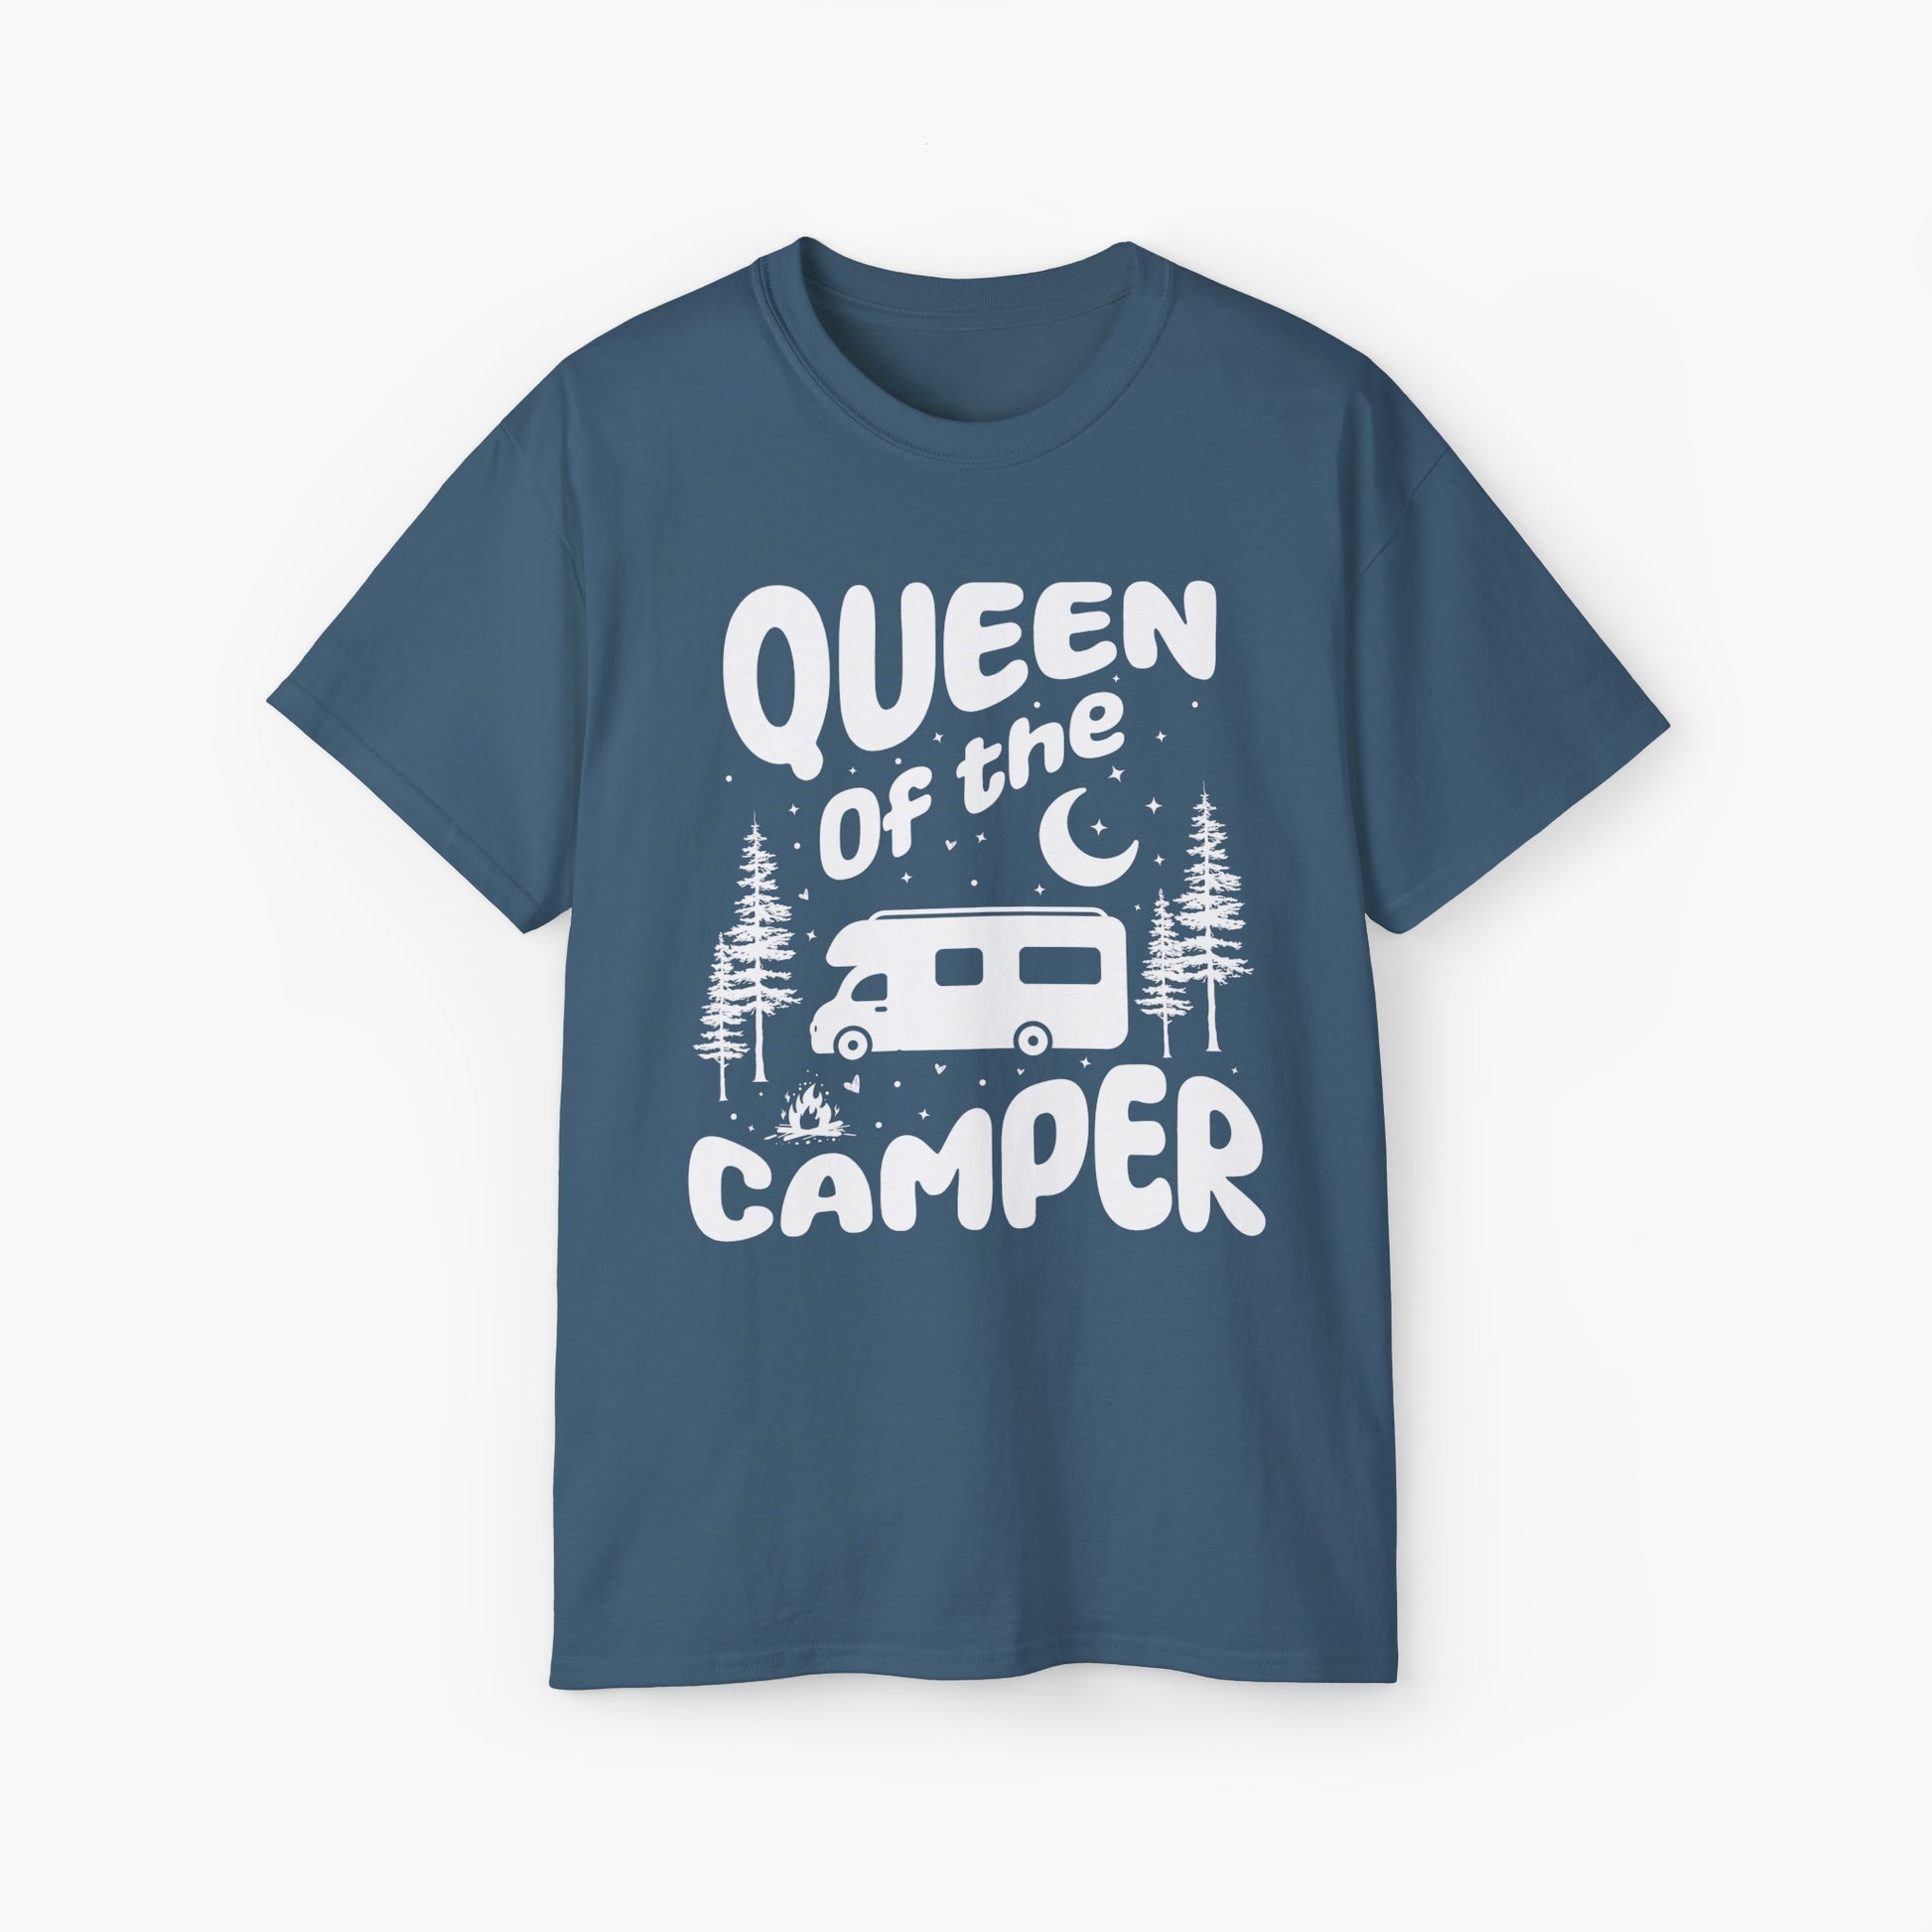 Blue t-shirt with 'Camping Queen' text, illustrated with a camping van, stars, trees, campfire, and moon, on a plain background.